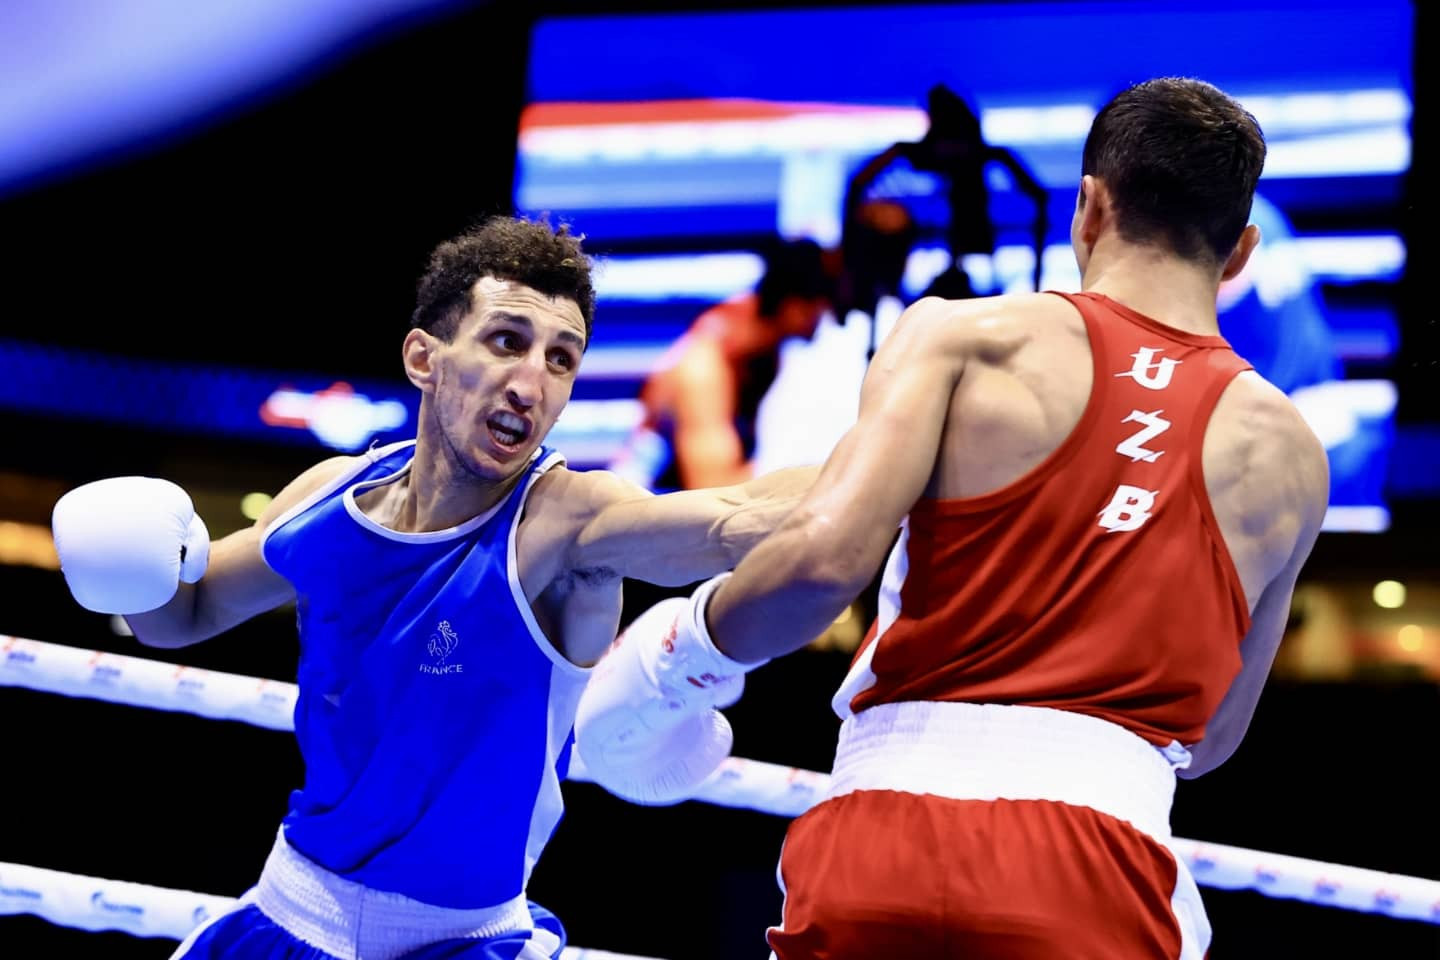 France's Sofiane Oumiha is one of seven defending champions that are set to compete in Tashkent ©IBA